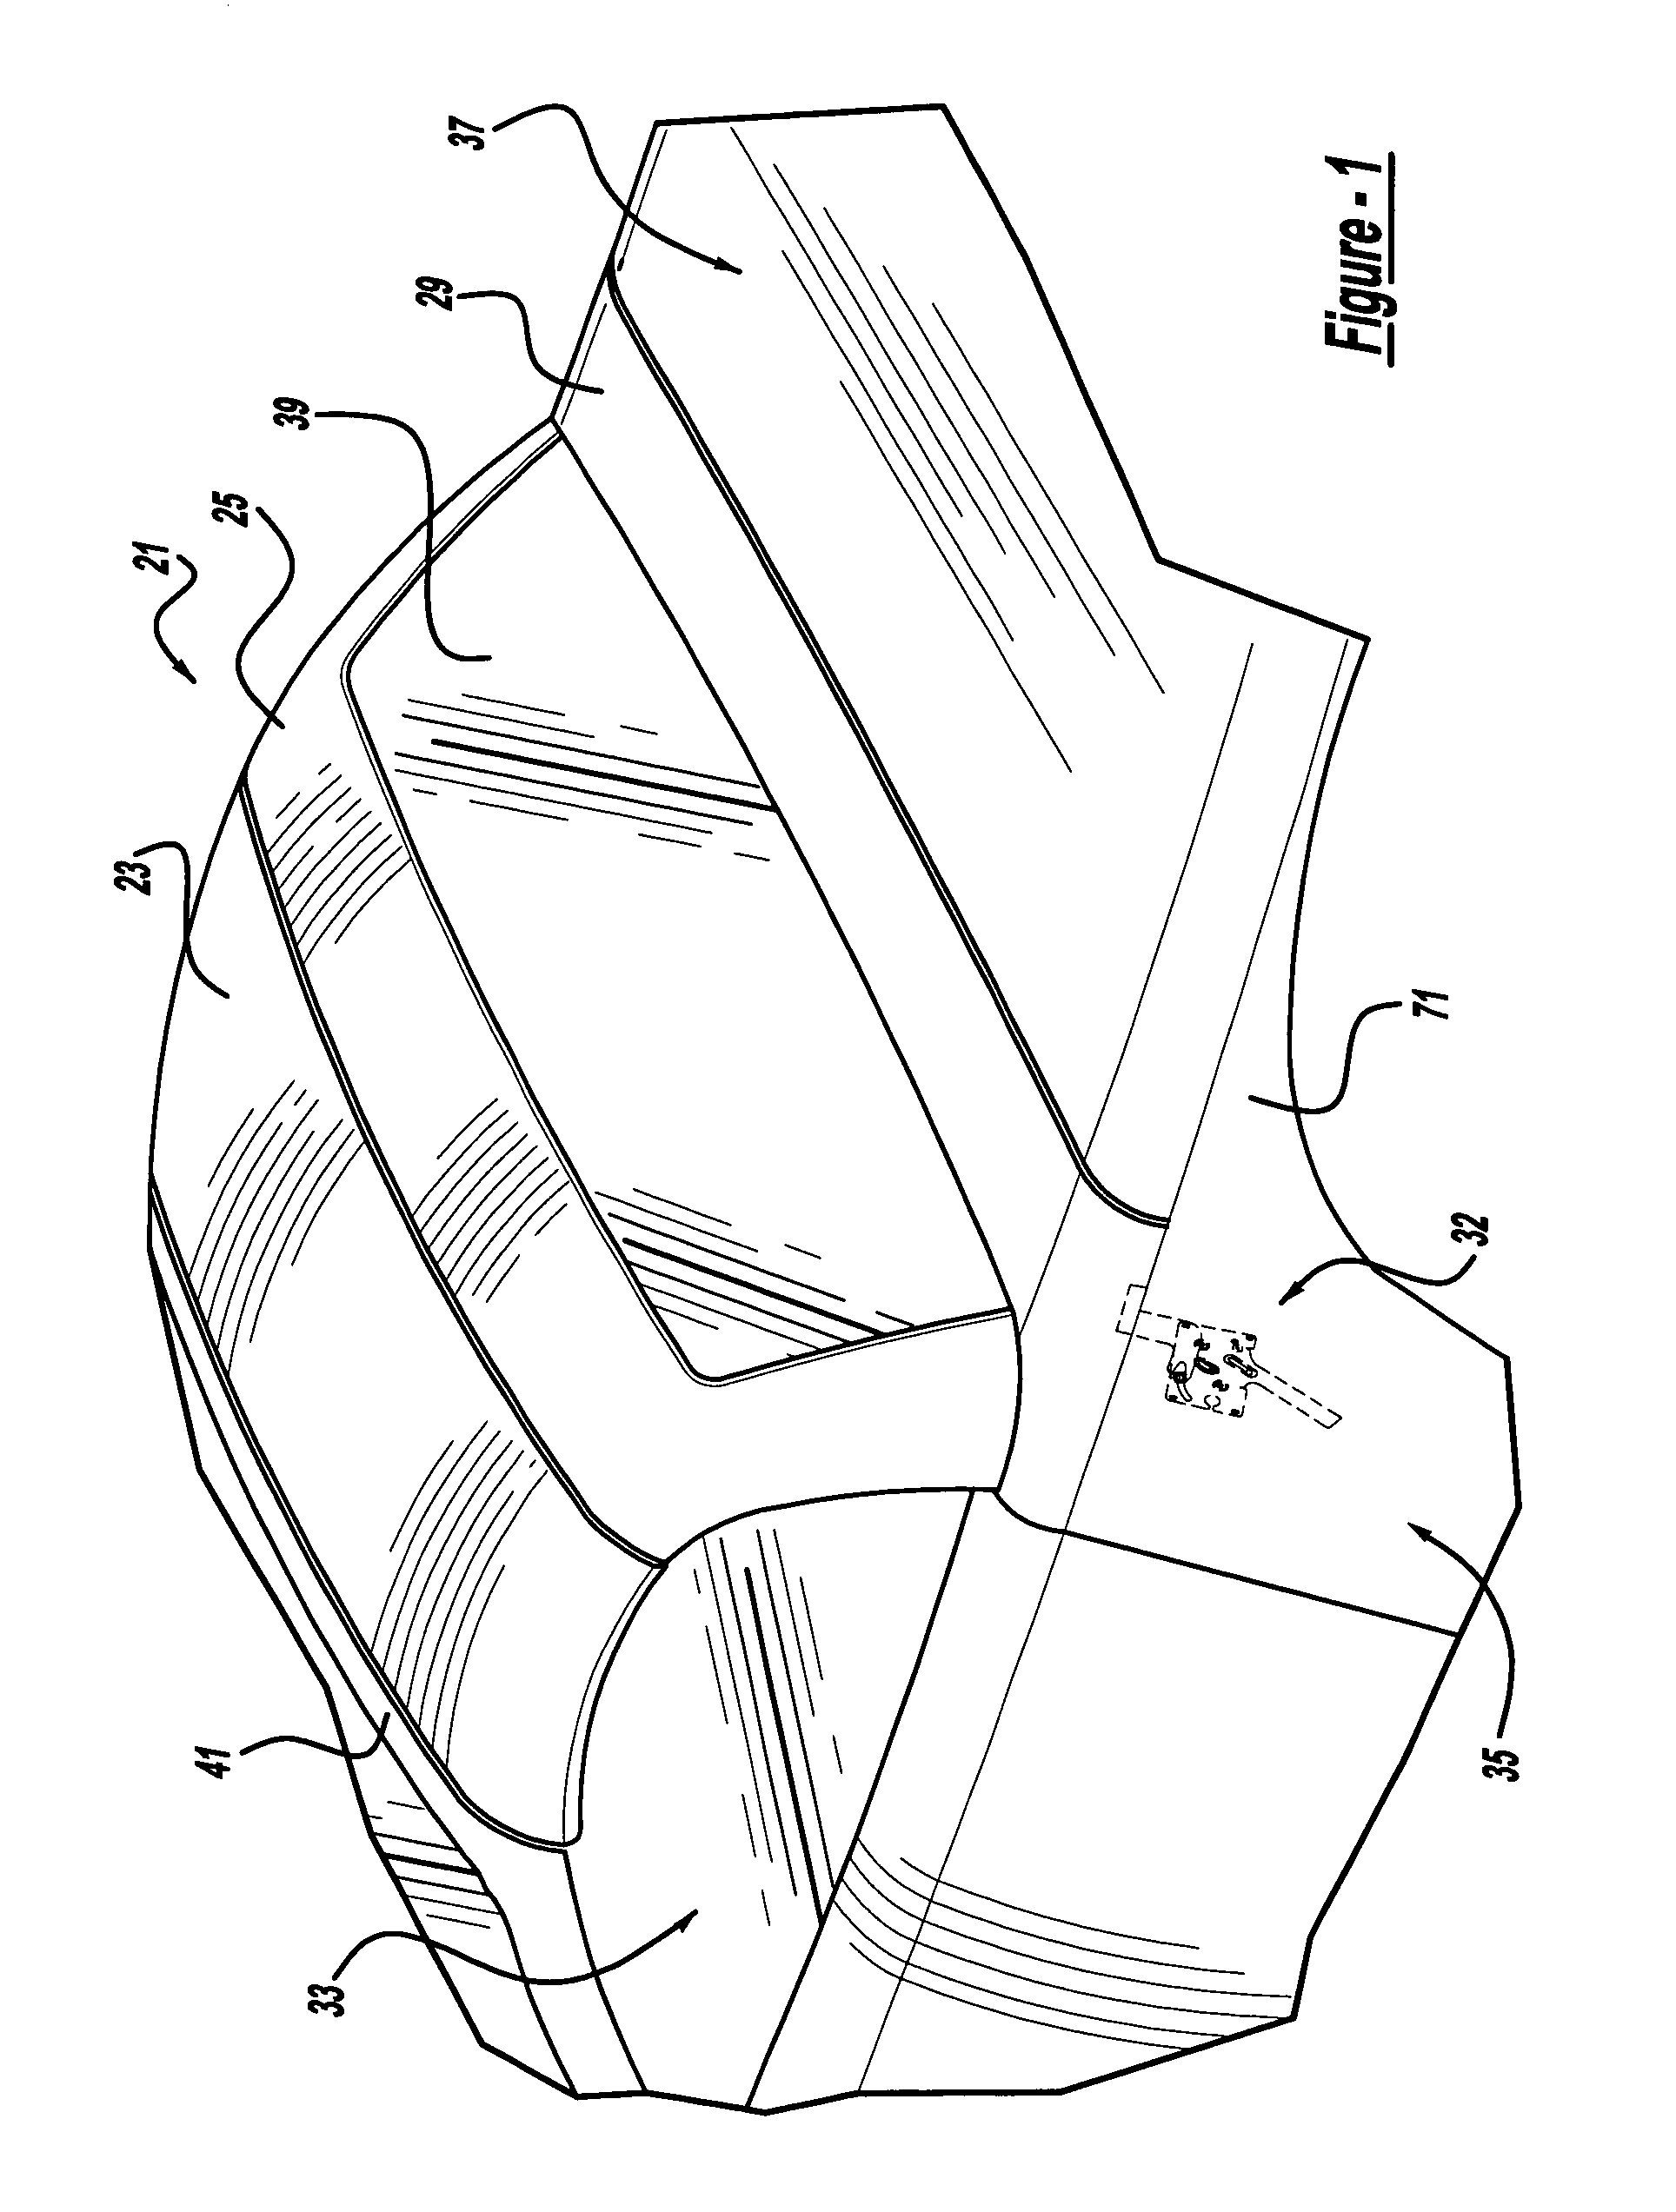 Latch for an automotive vehicle having a convertible roof